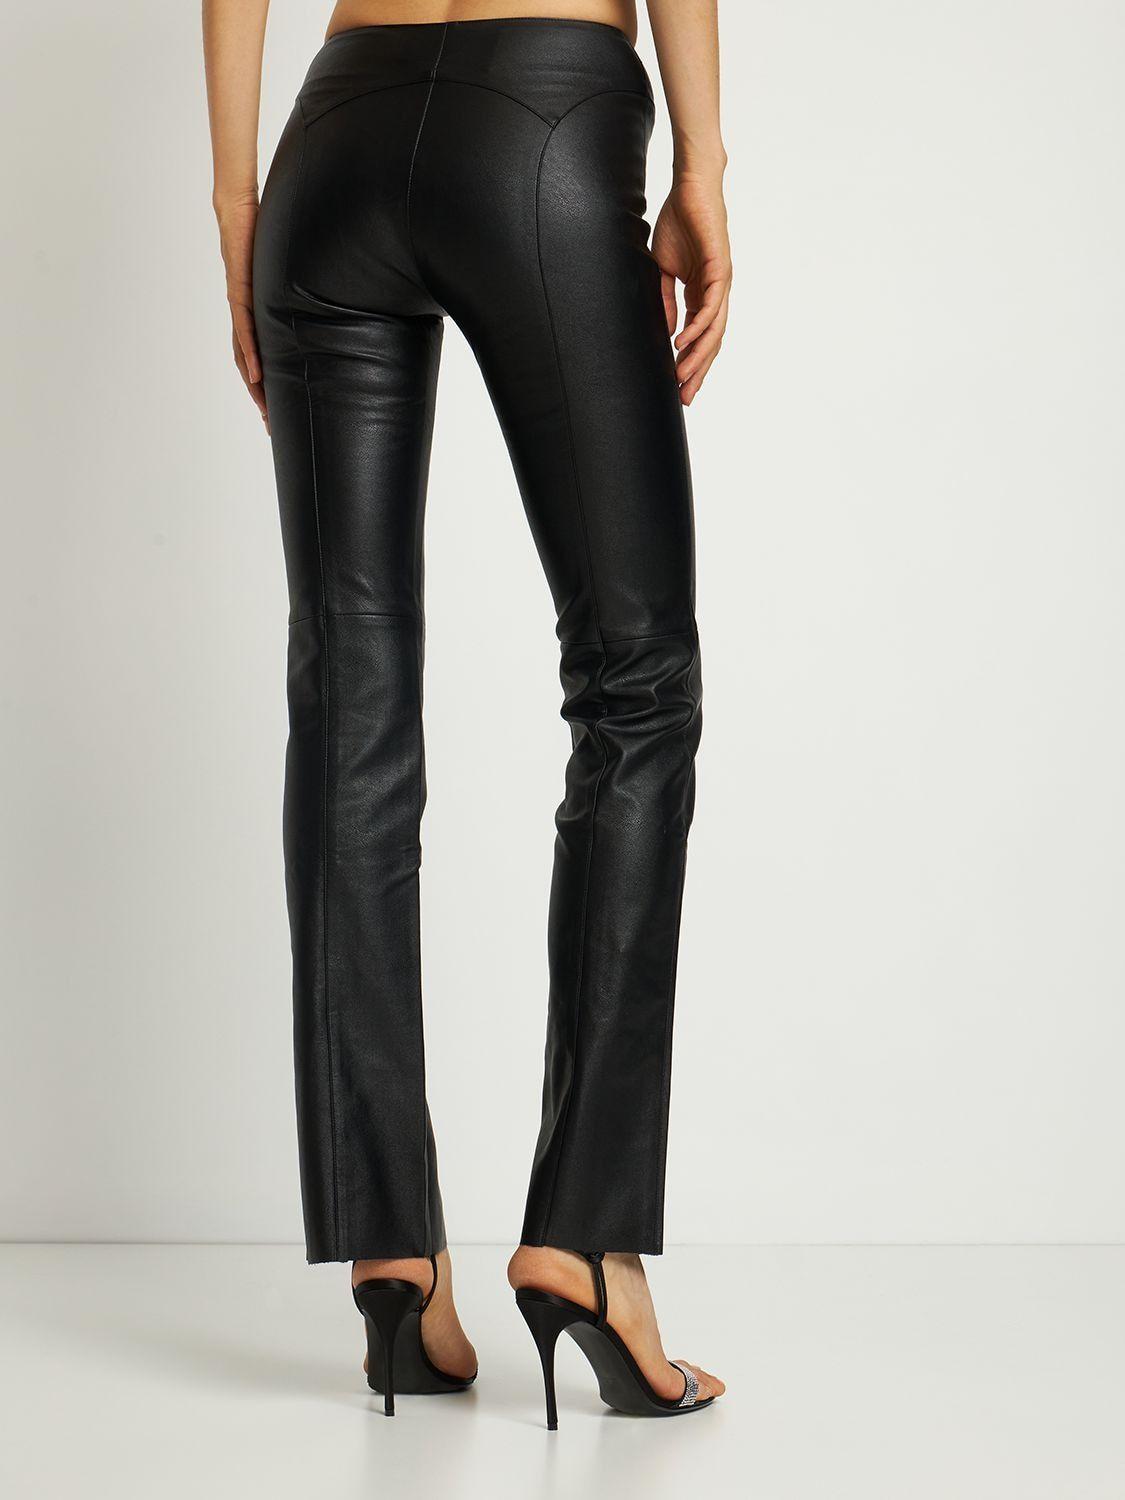 Miaou Elet Lace-up Faux Leather Pants in Black